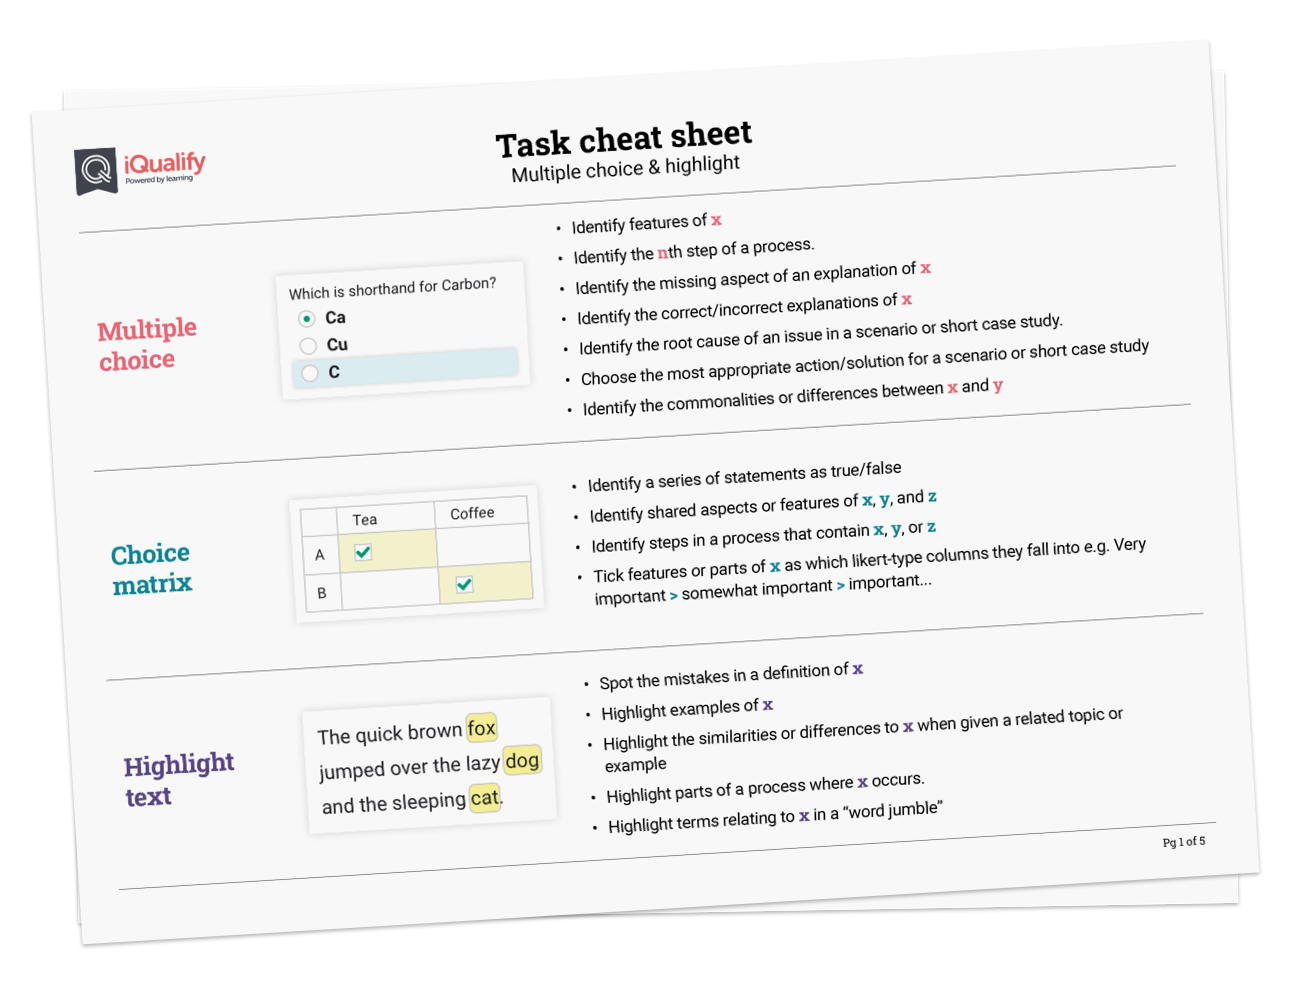 Preview of Task cheat sheet pdf (linked below).